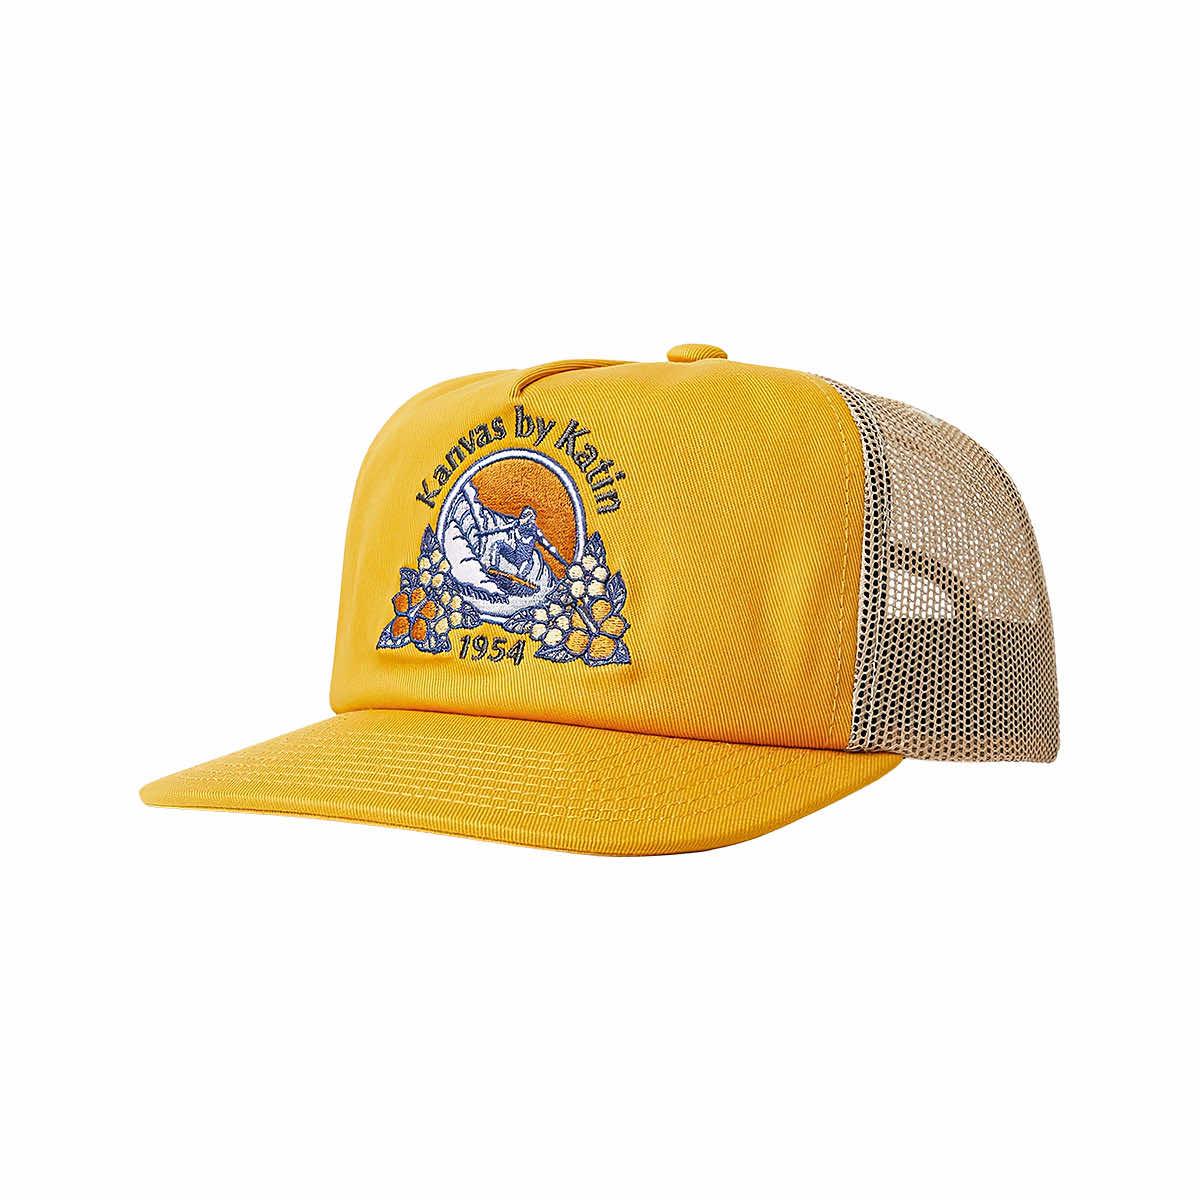 Custom Name Hat - Leather Patch - Many Colors - Motion Ducks, LLC